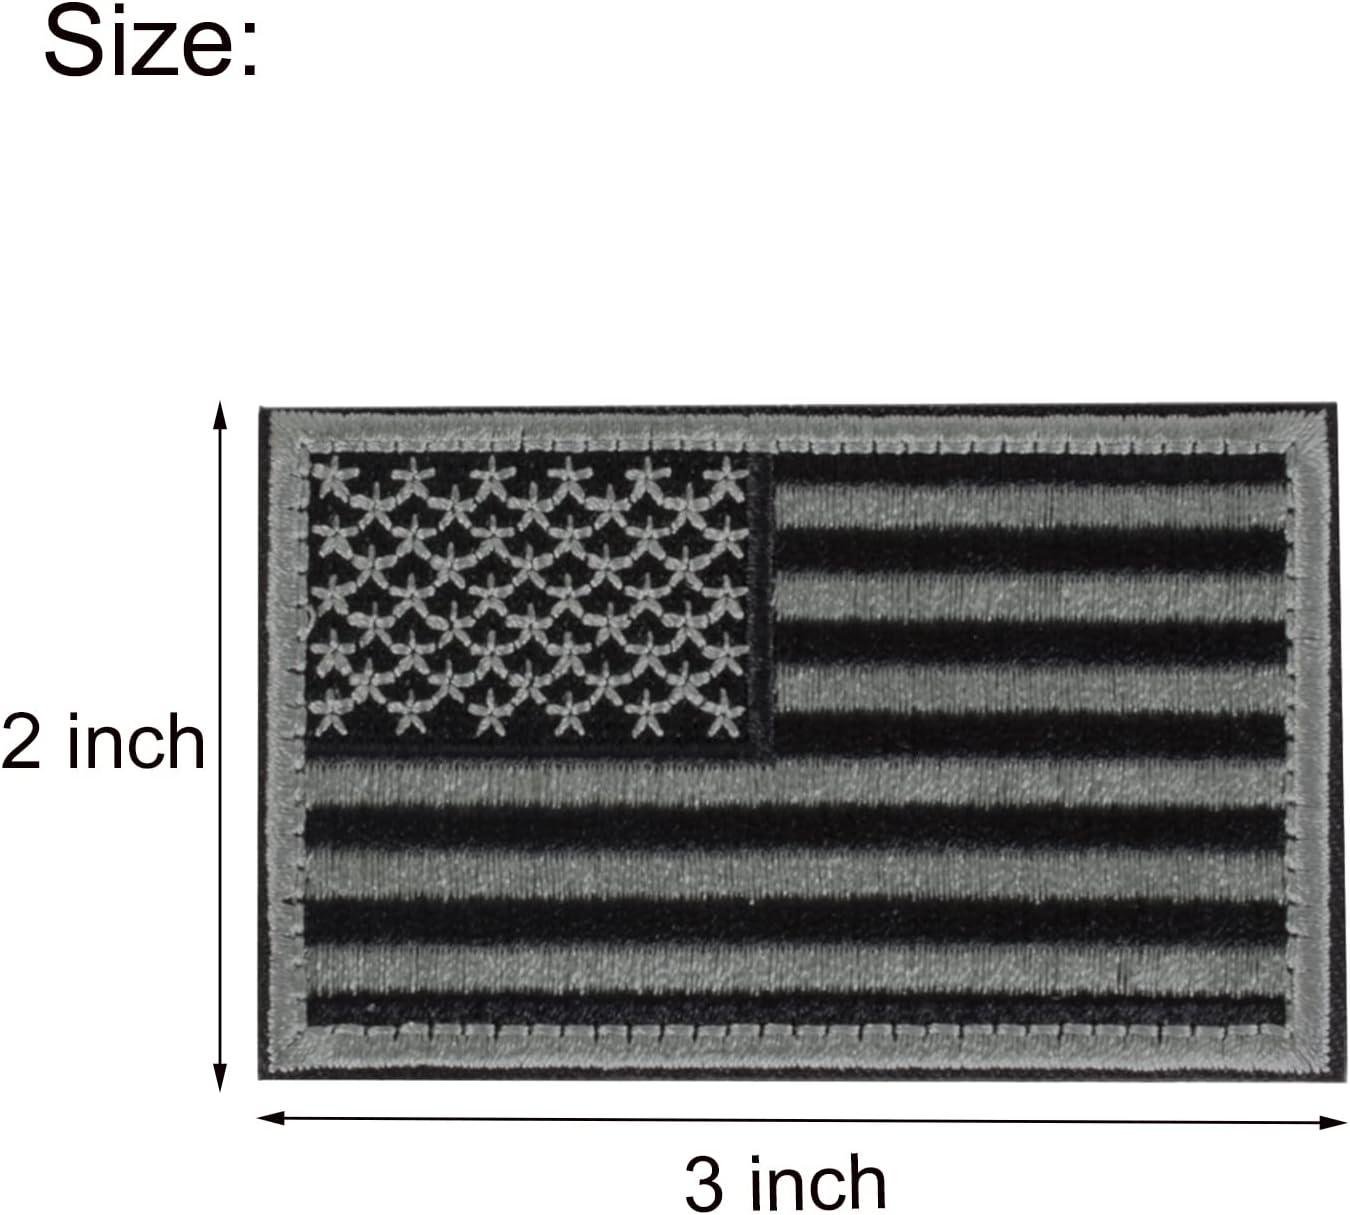  GYGYL 14 Pcs Random Tactical Morale Patches Bundle Set, Hook  and Loop Fastener American Military Patches for Tactical Caps, Bags,  Backpacks, Tactical Vest, Military Uniforms : Sports & Outdoors